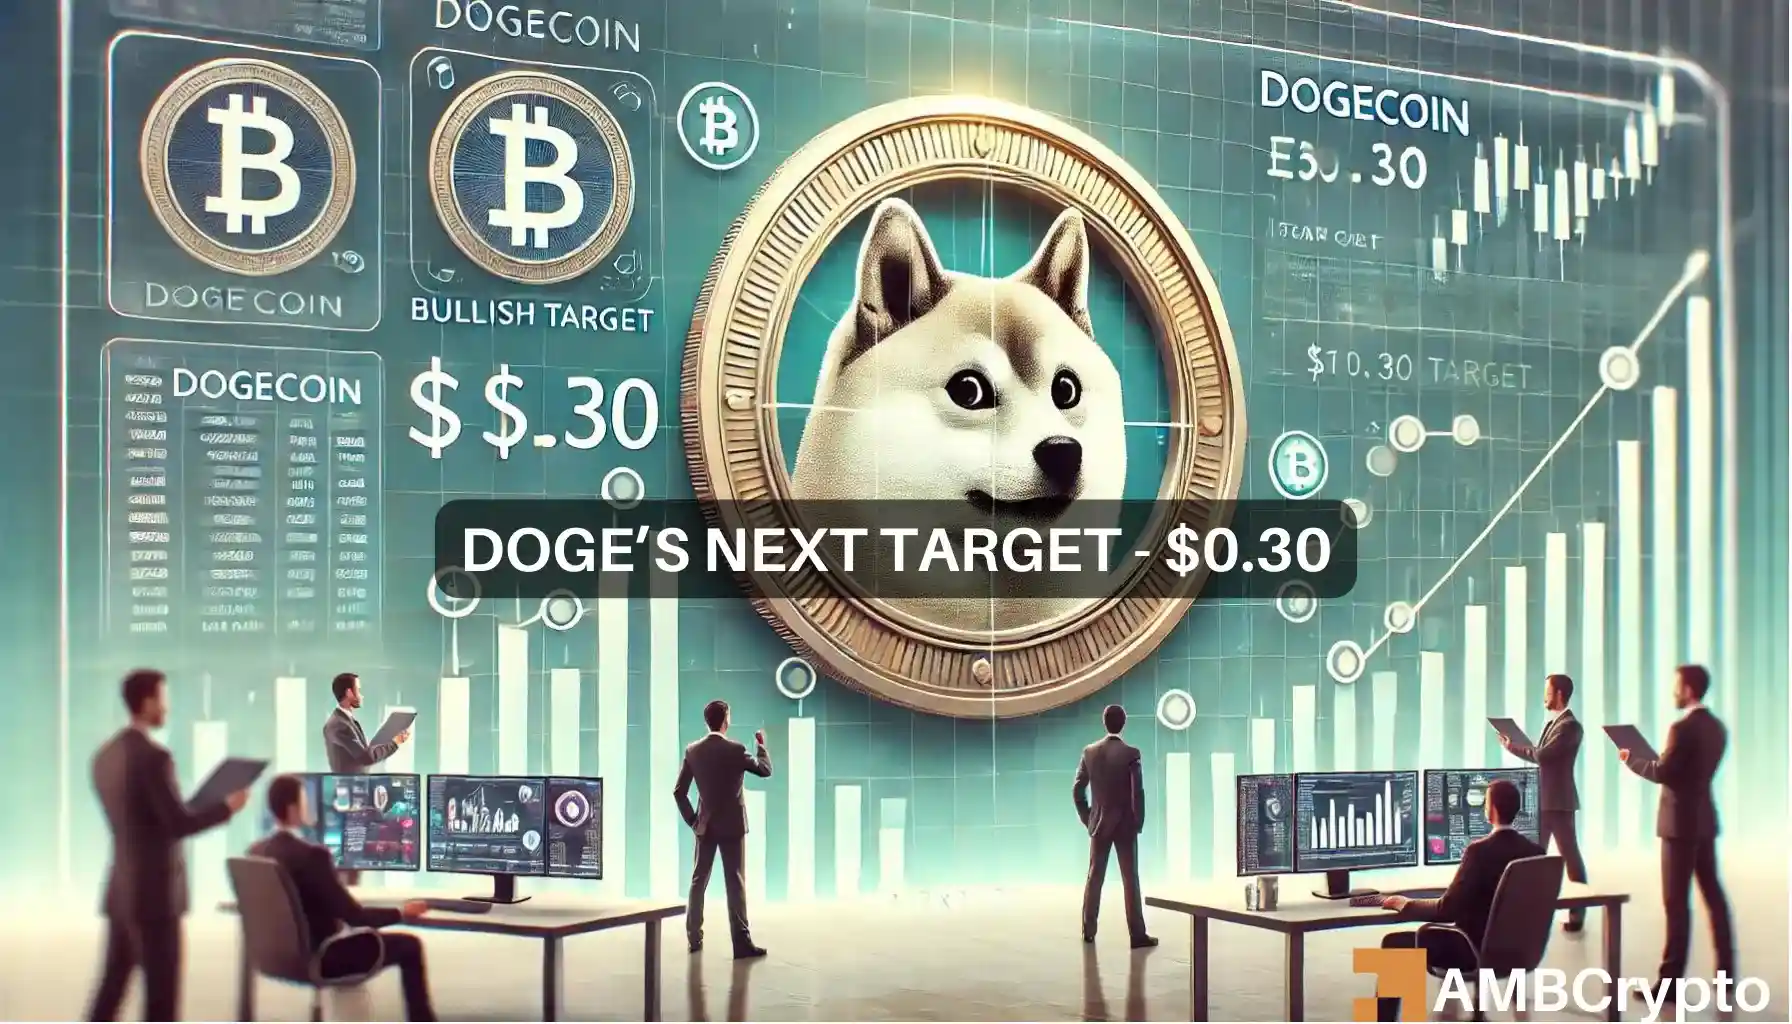 Dogecoin price prediction - Examining the memecoin's road to $0.30